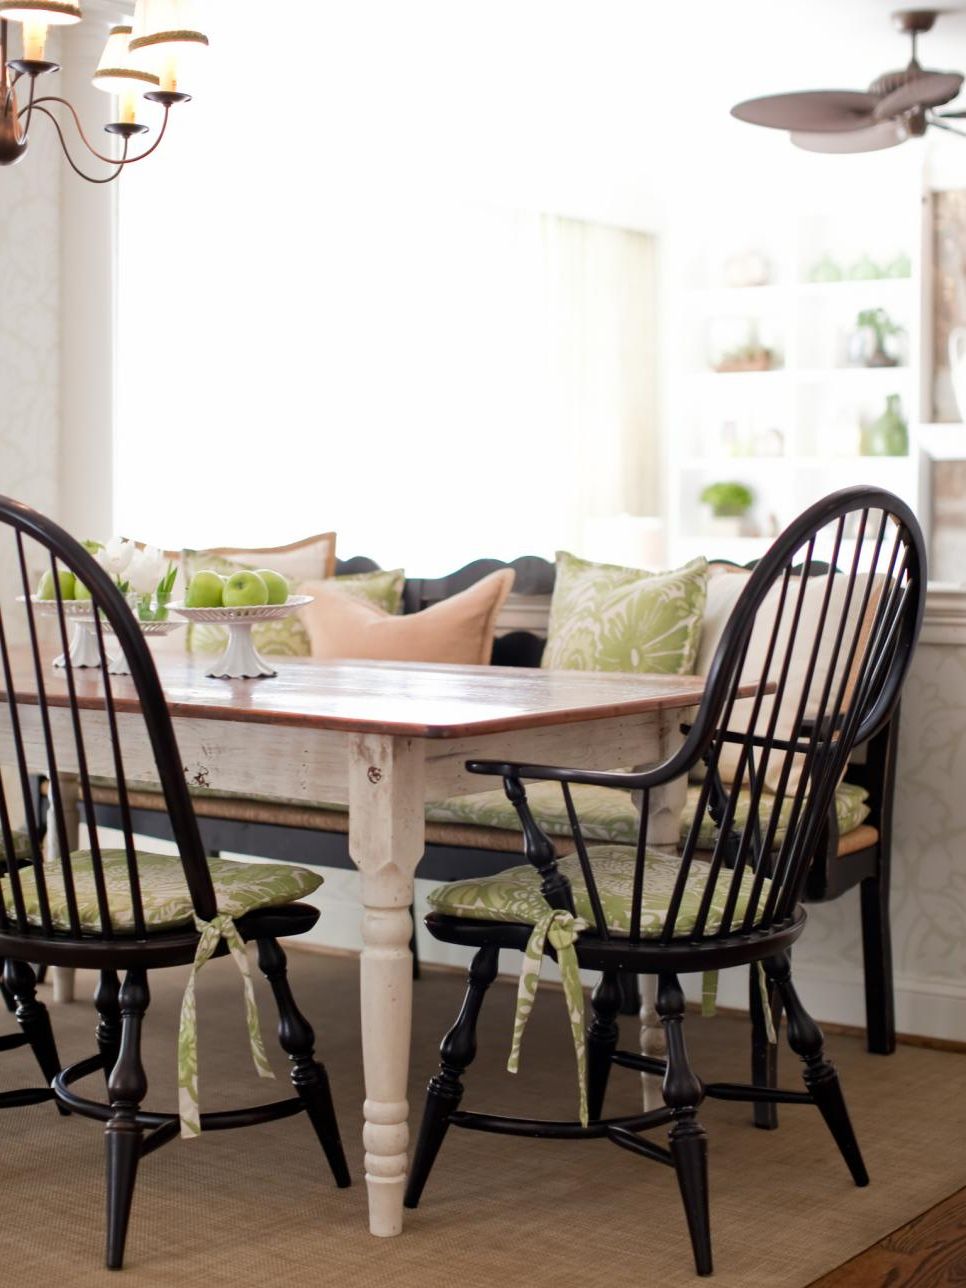 Black Windsor Chairs Around Country Dining Table (Gallery 17 of 20)